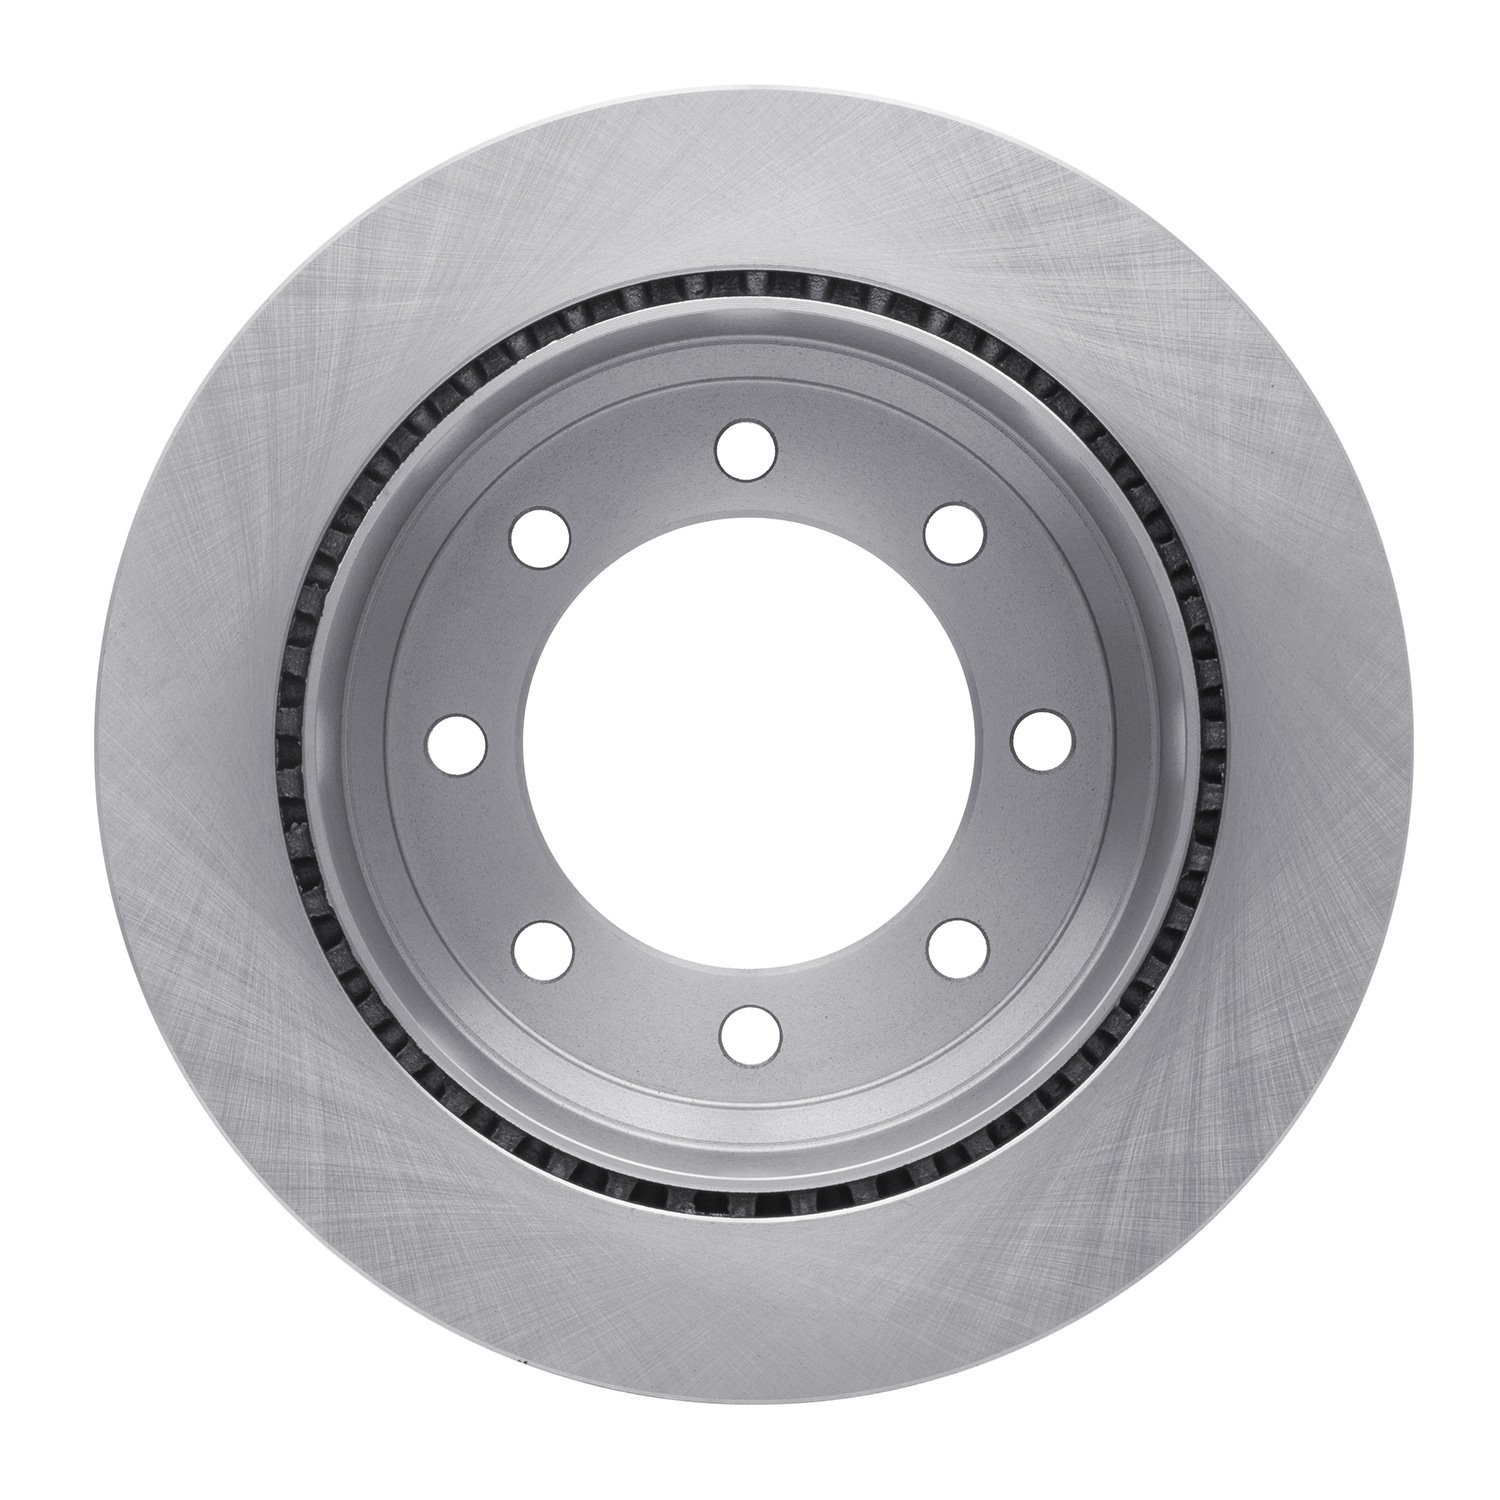 600-54208 Brake Rotor, Fits Select Ford/Lincoln/Mercury/Mazda, Position: Rear